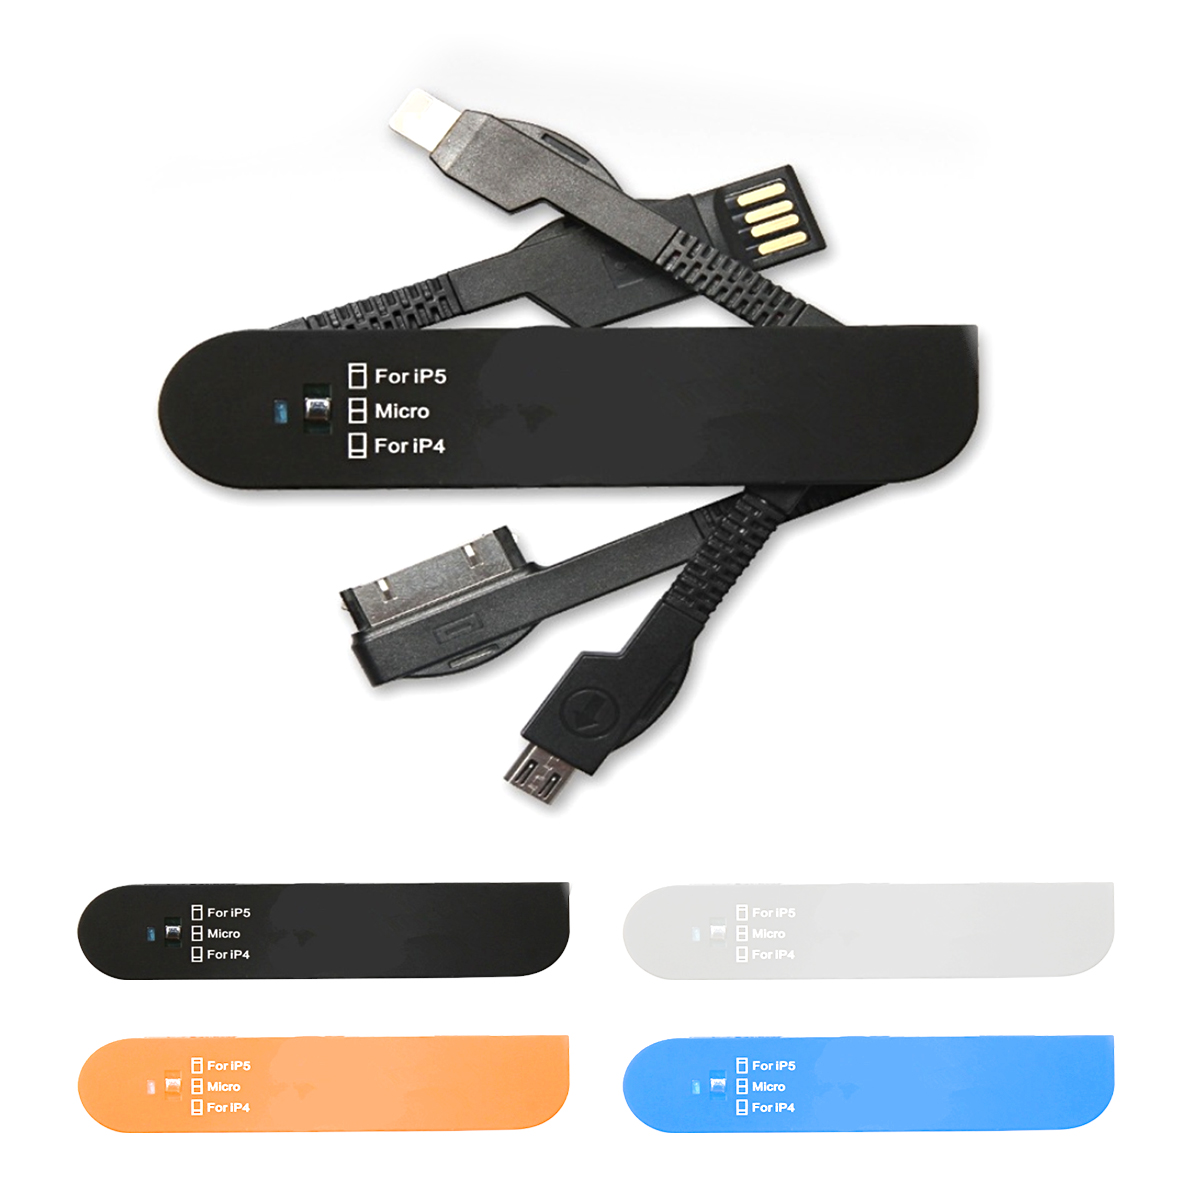 Multifunction Swiss Knife Style Charging Cable